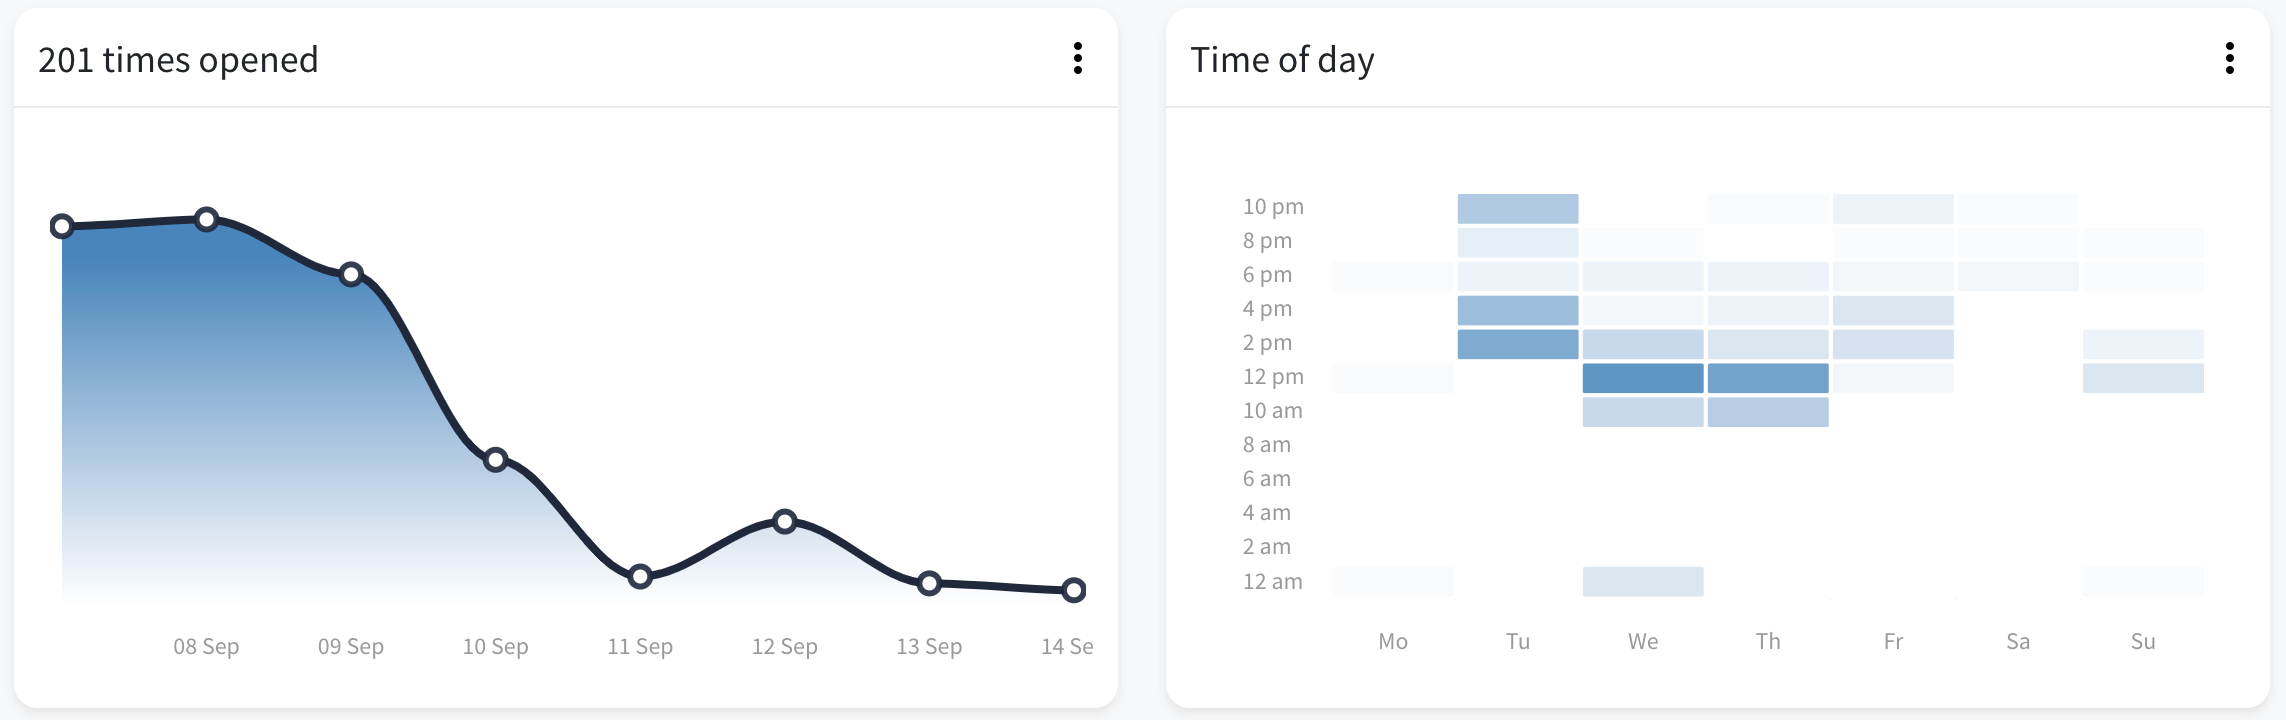 Tracking pixel opened charts